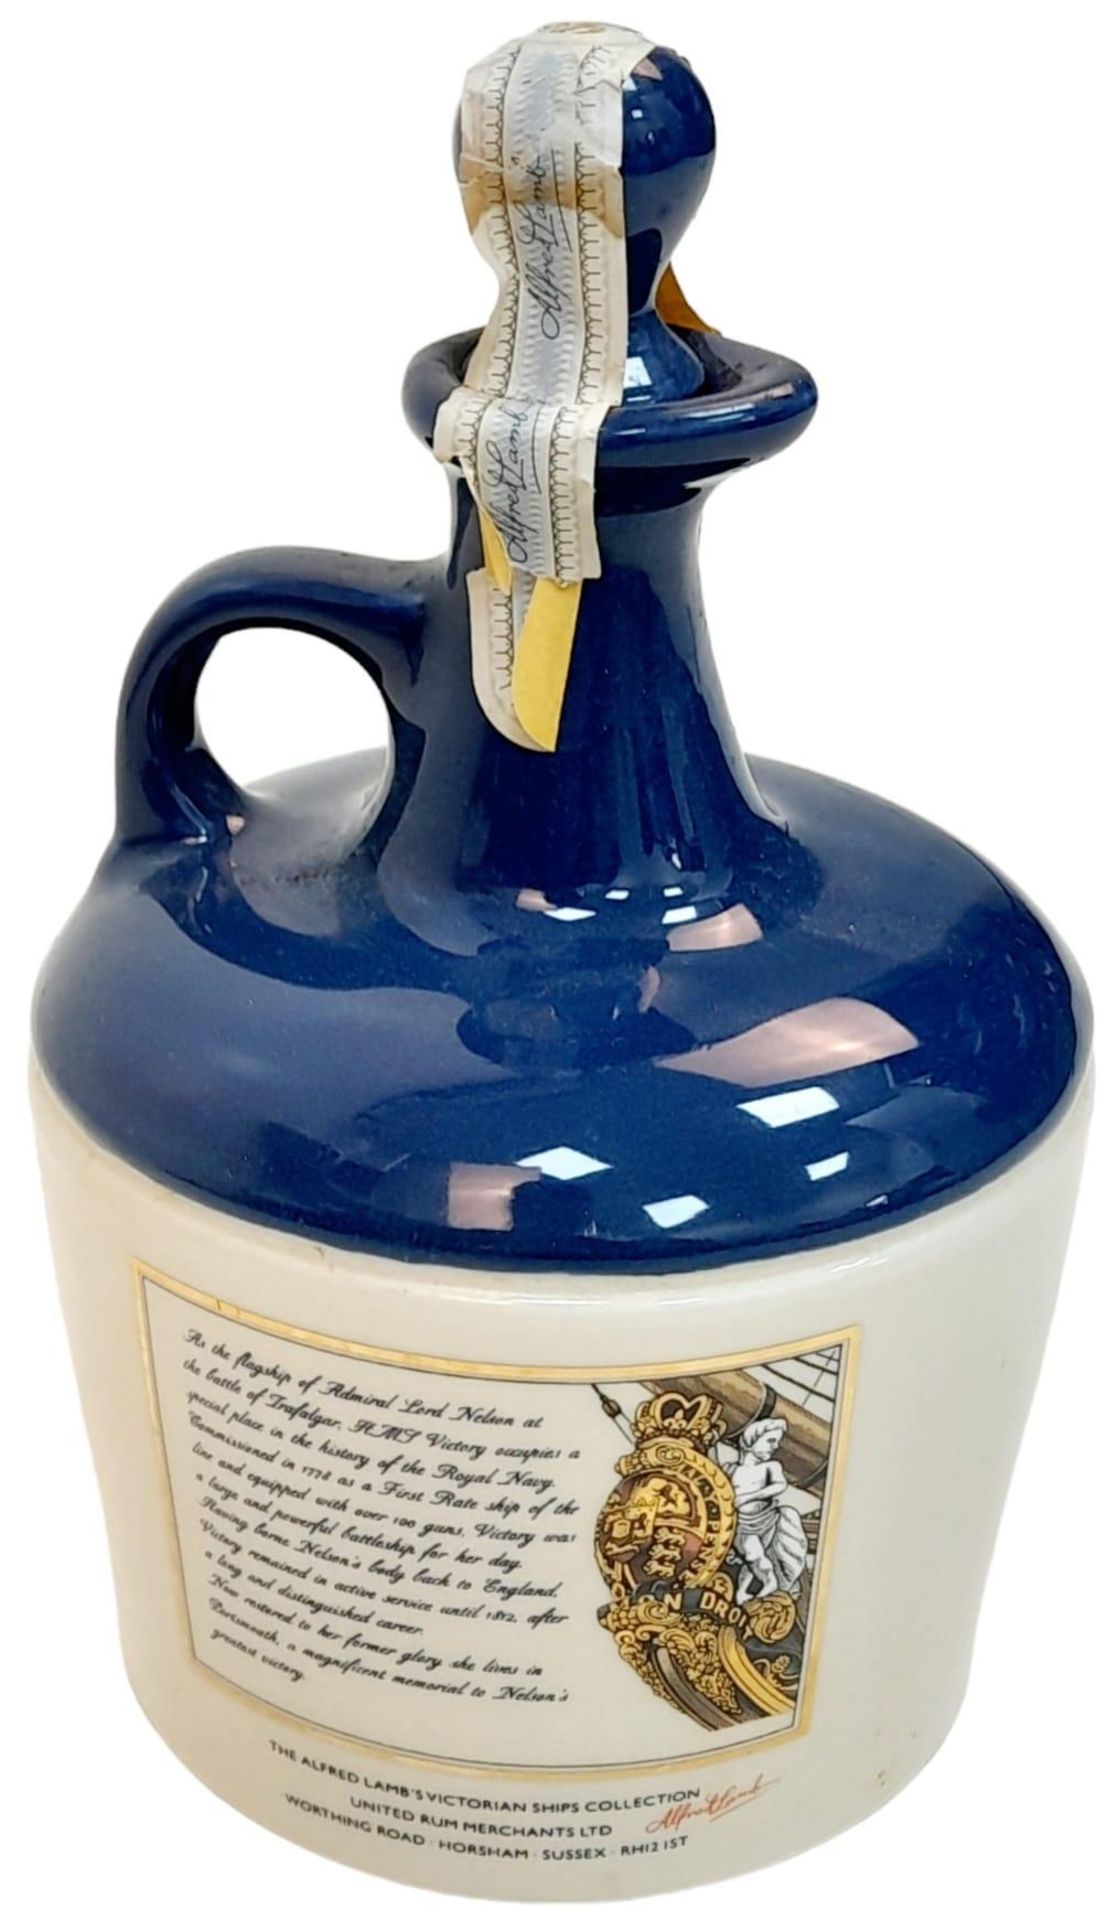 A ‘Unopened’ Vintage, Stone Pottery Bottle/Flagon of Lambs Navy Rum Featuring HMS Victory. The - Image 2 of 4